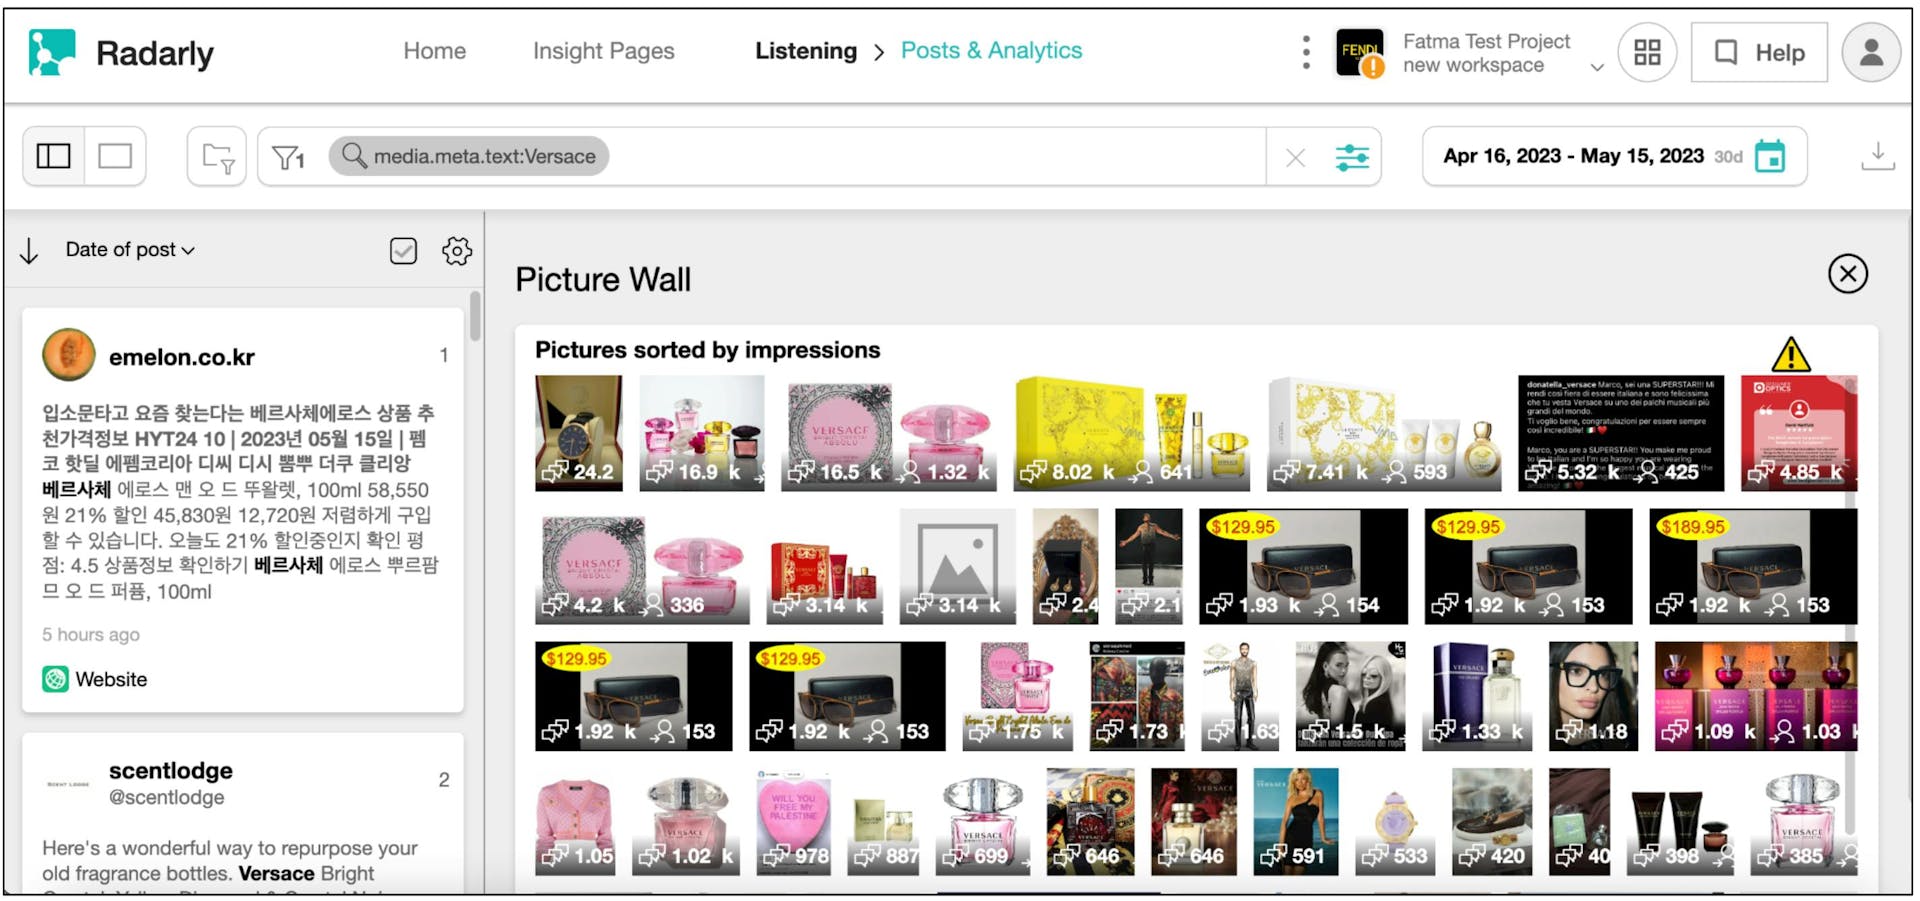 Radarly textual search in images - image recognition tool feature